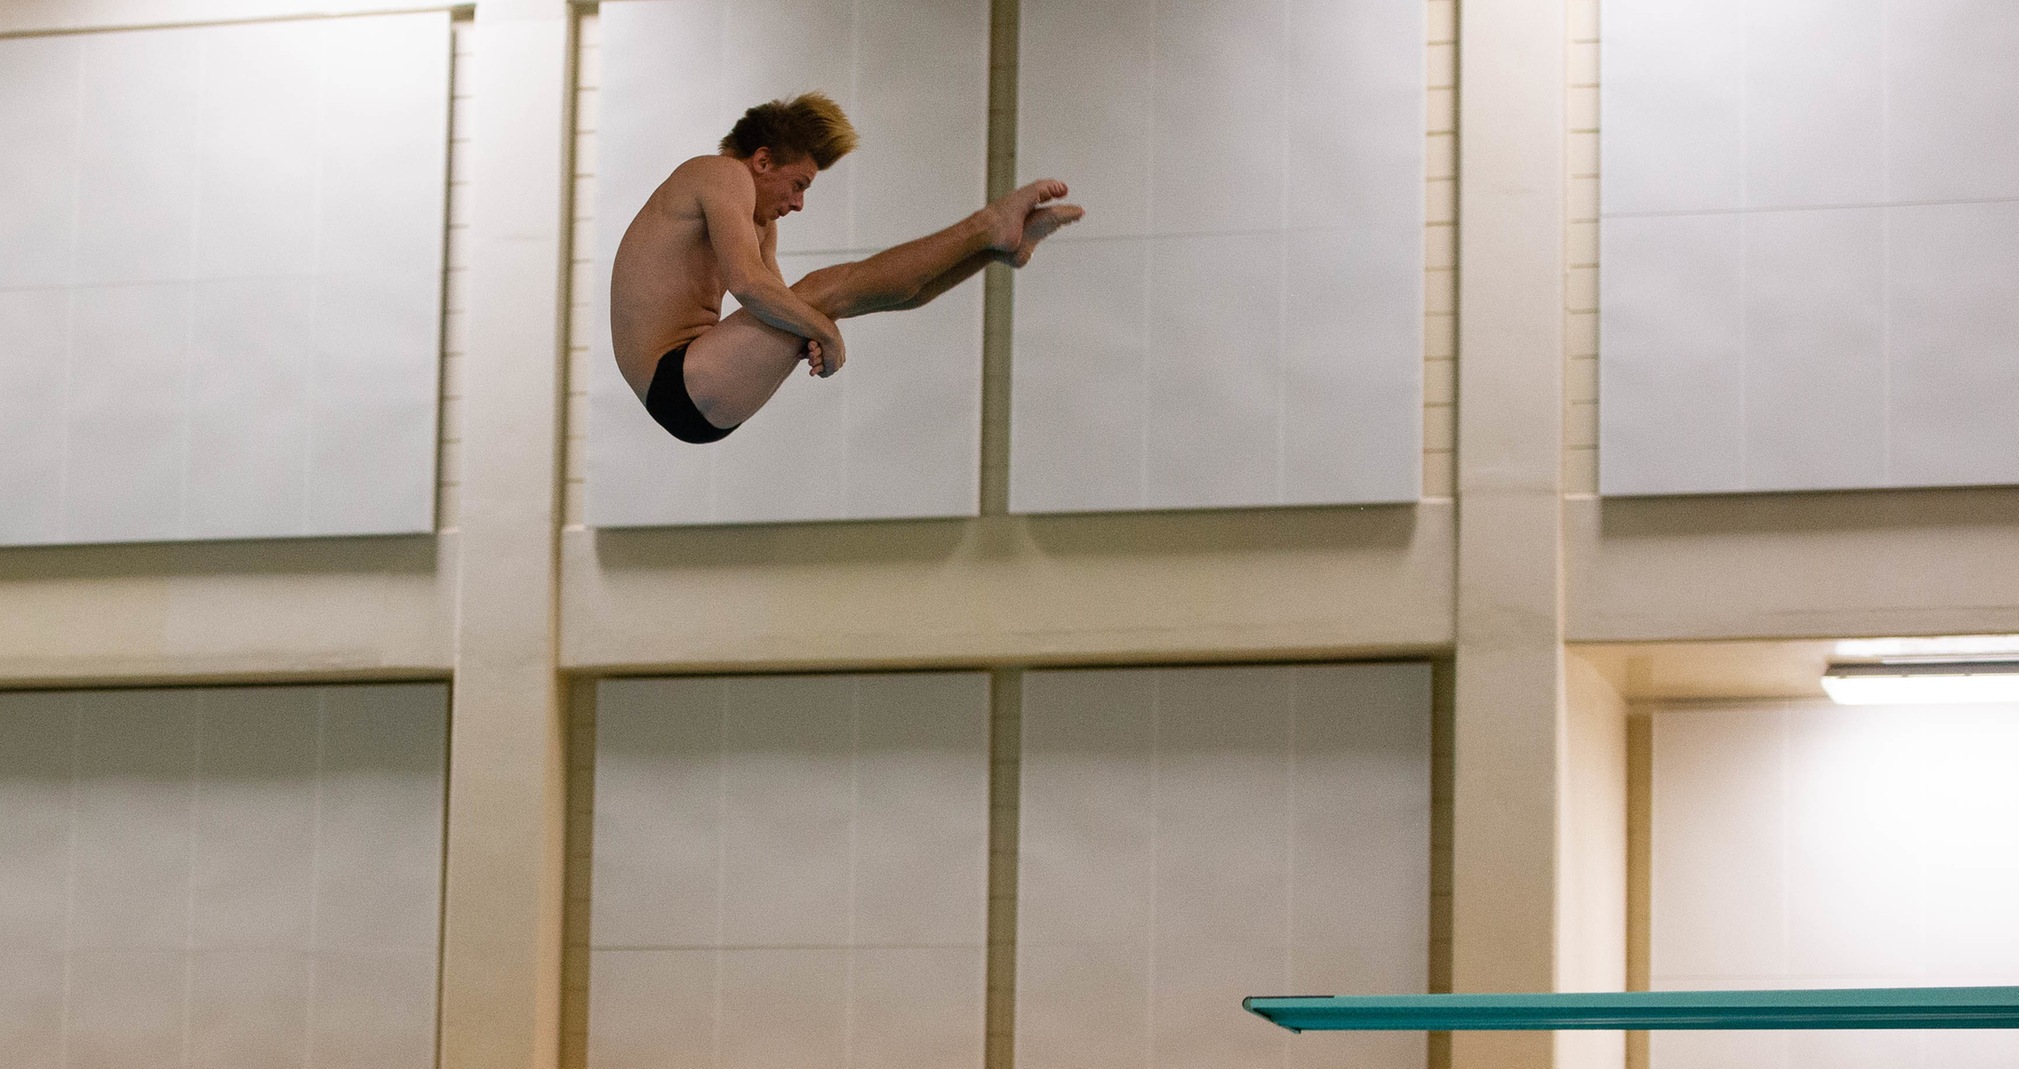 Matt Wilke won the 1- and 3-meter diving events at the Carthage College Classic.